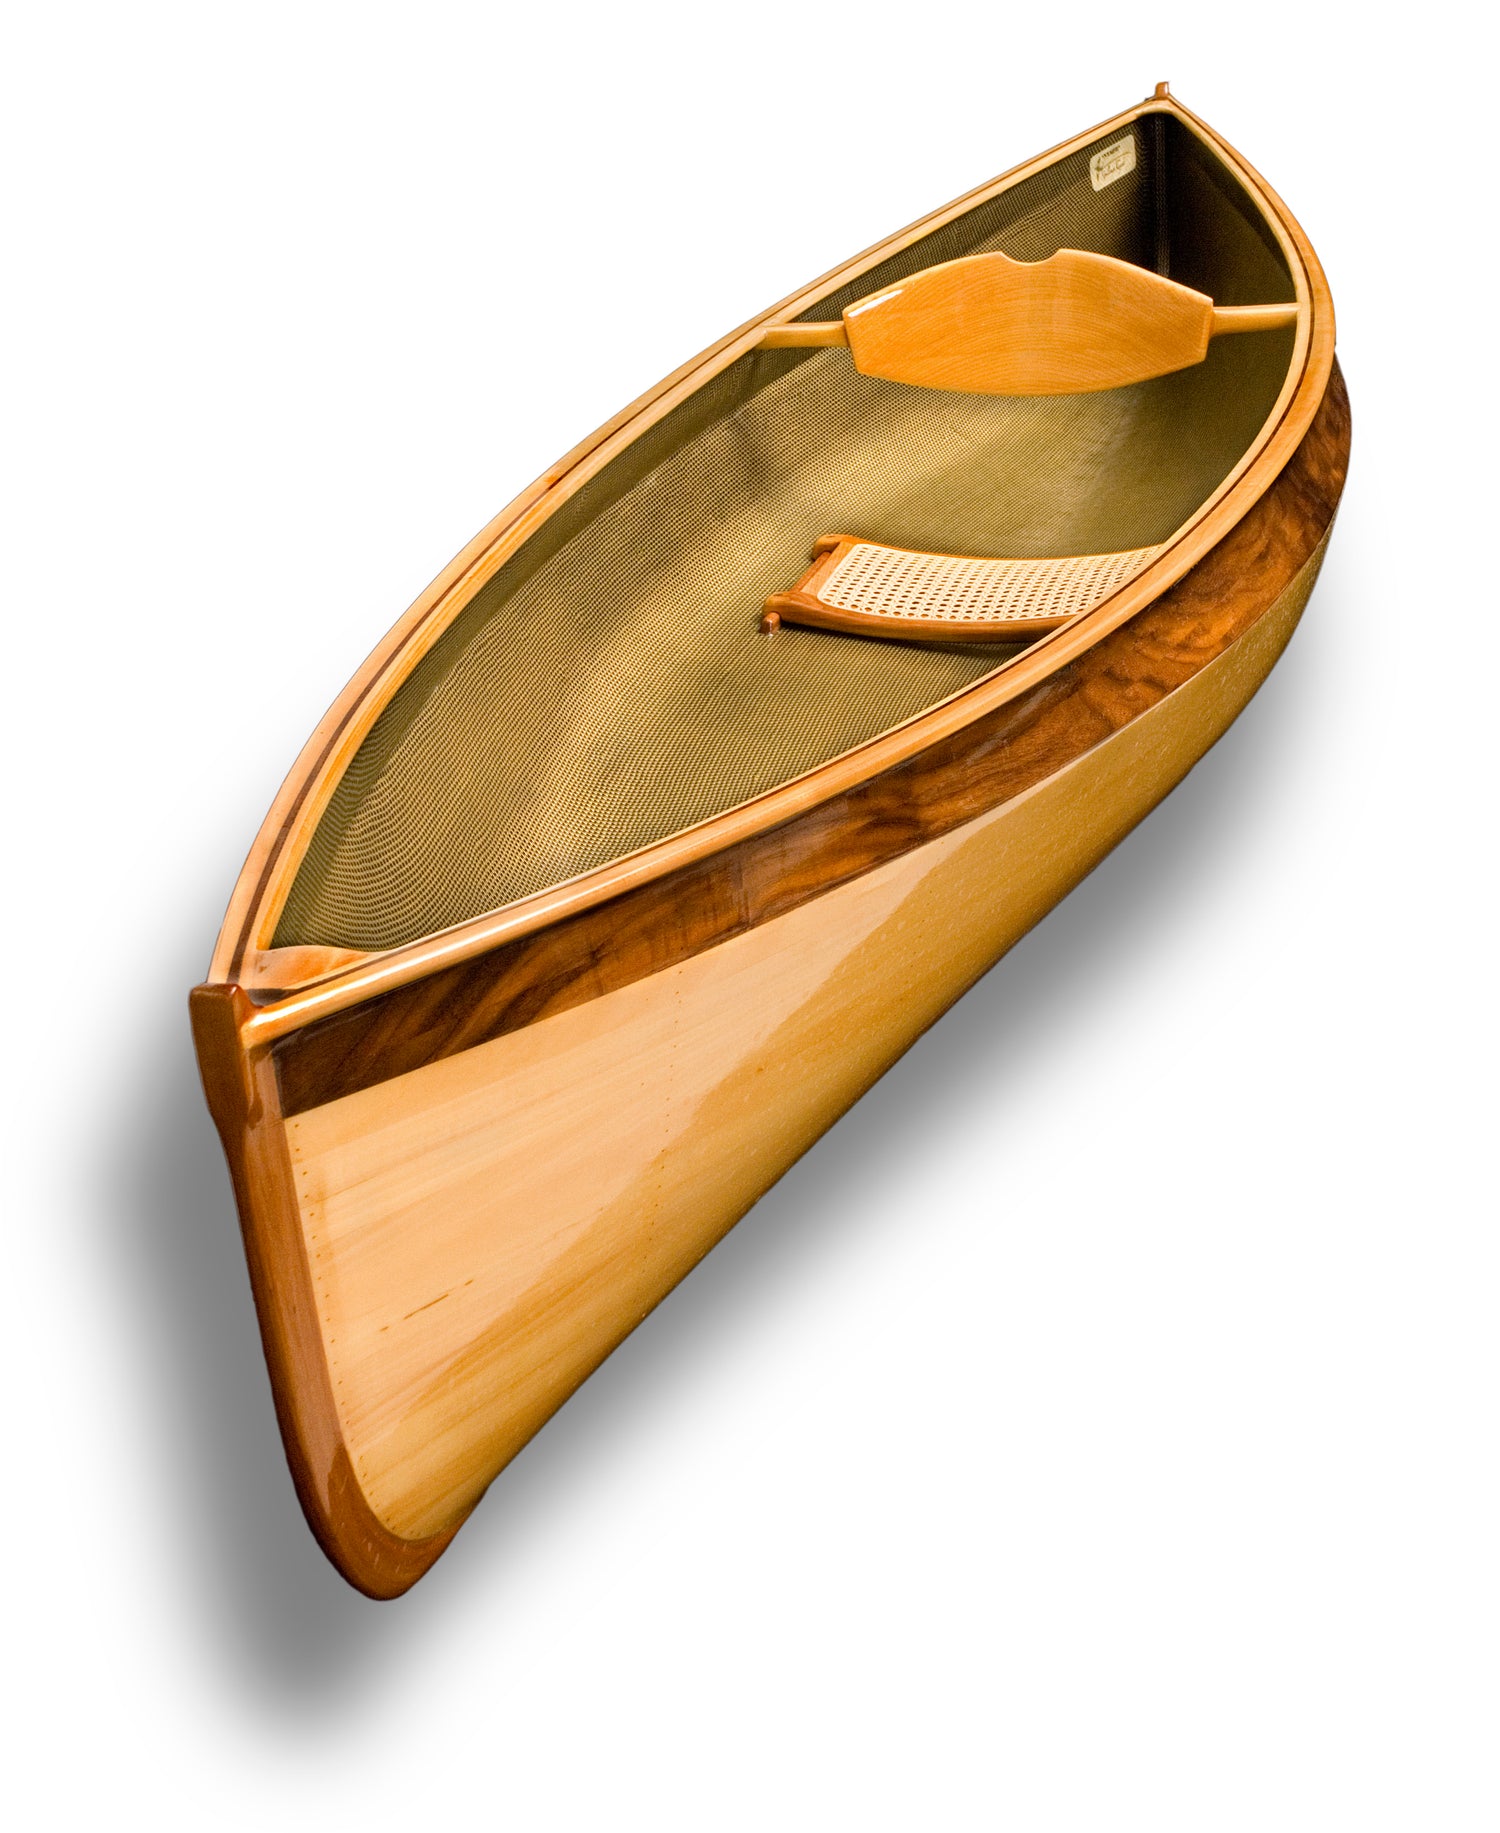 Small Wood Boat Plans